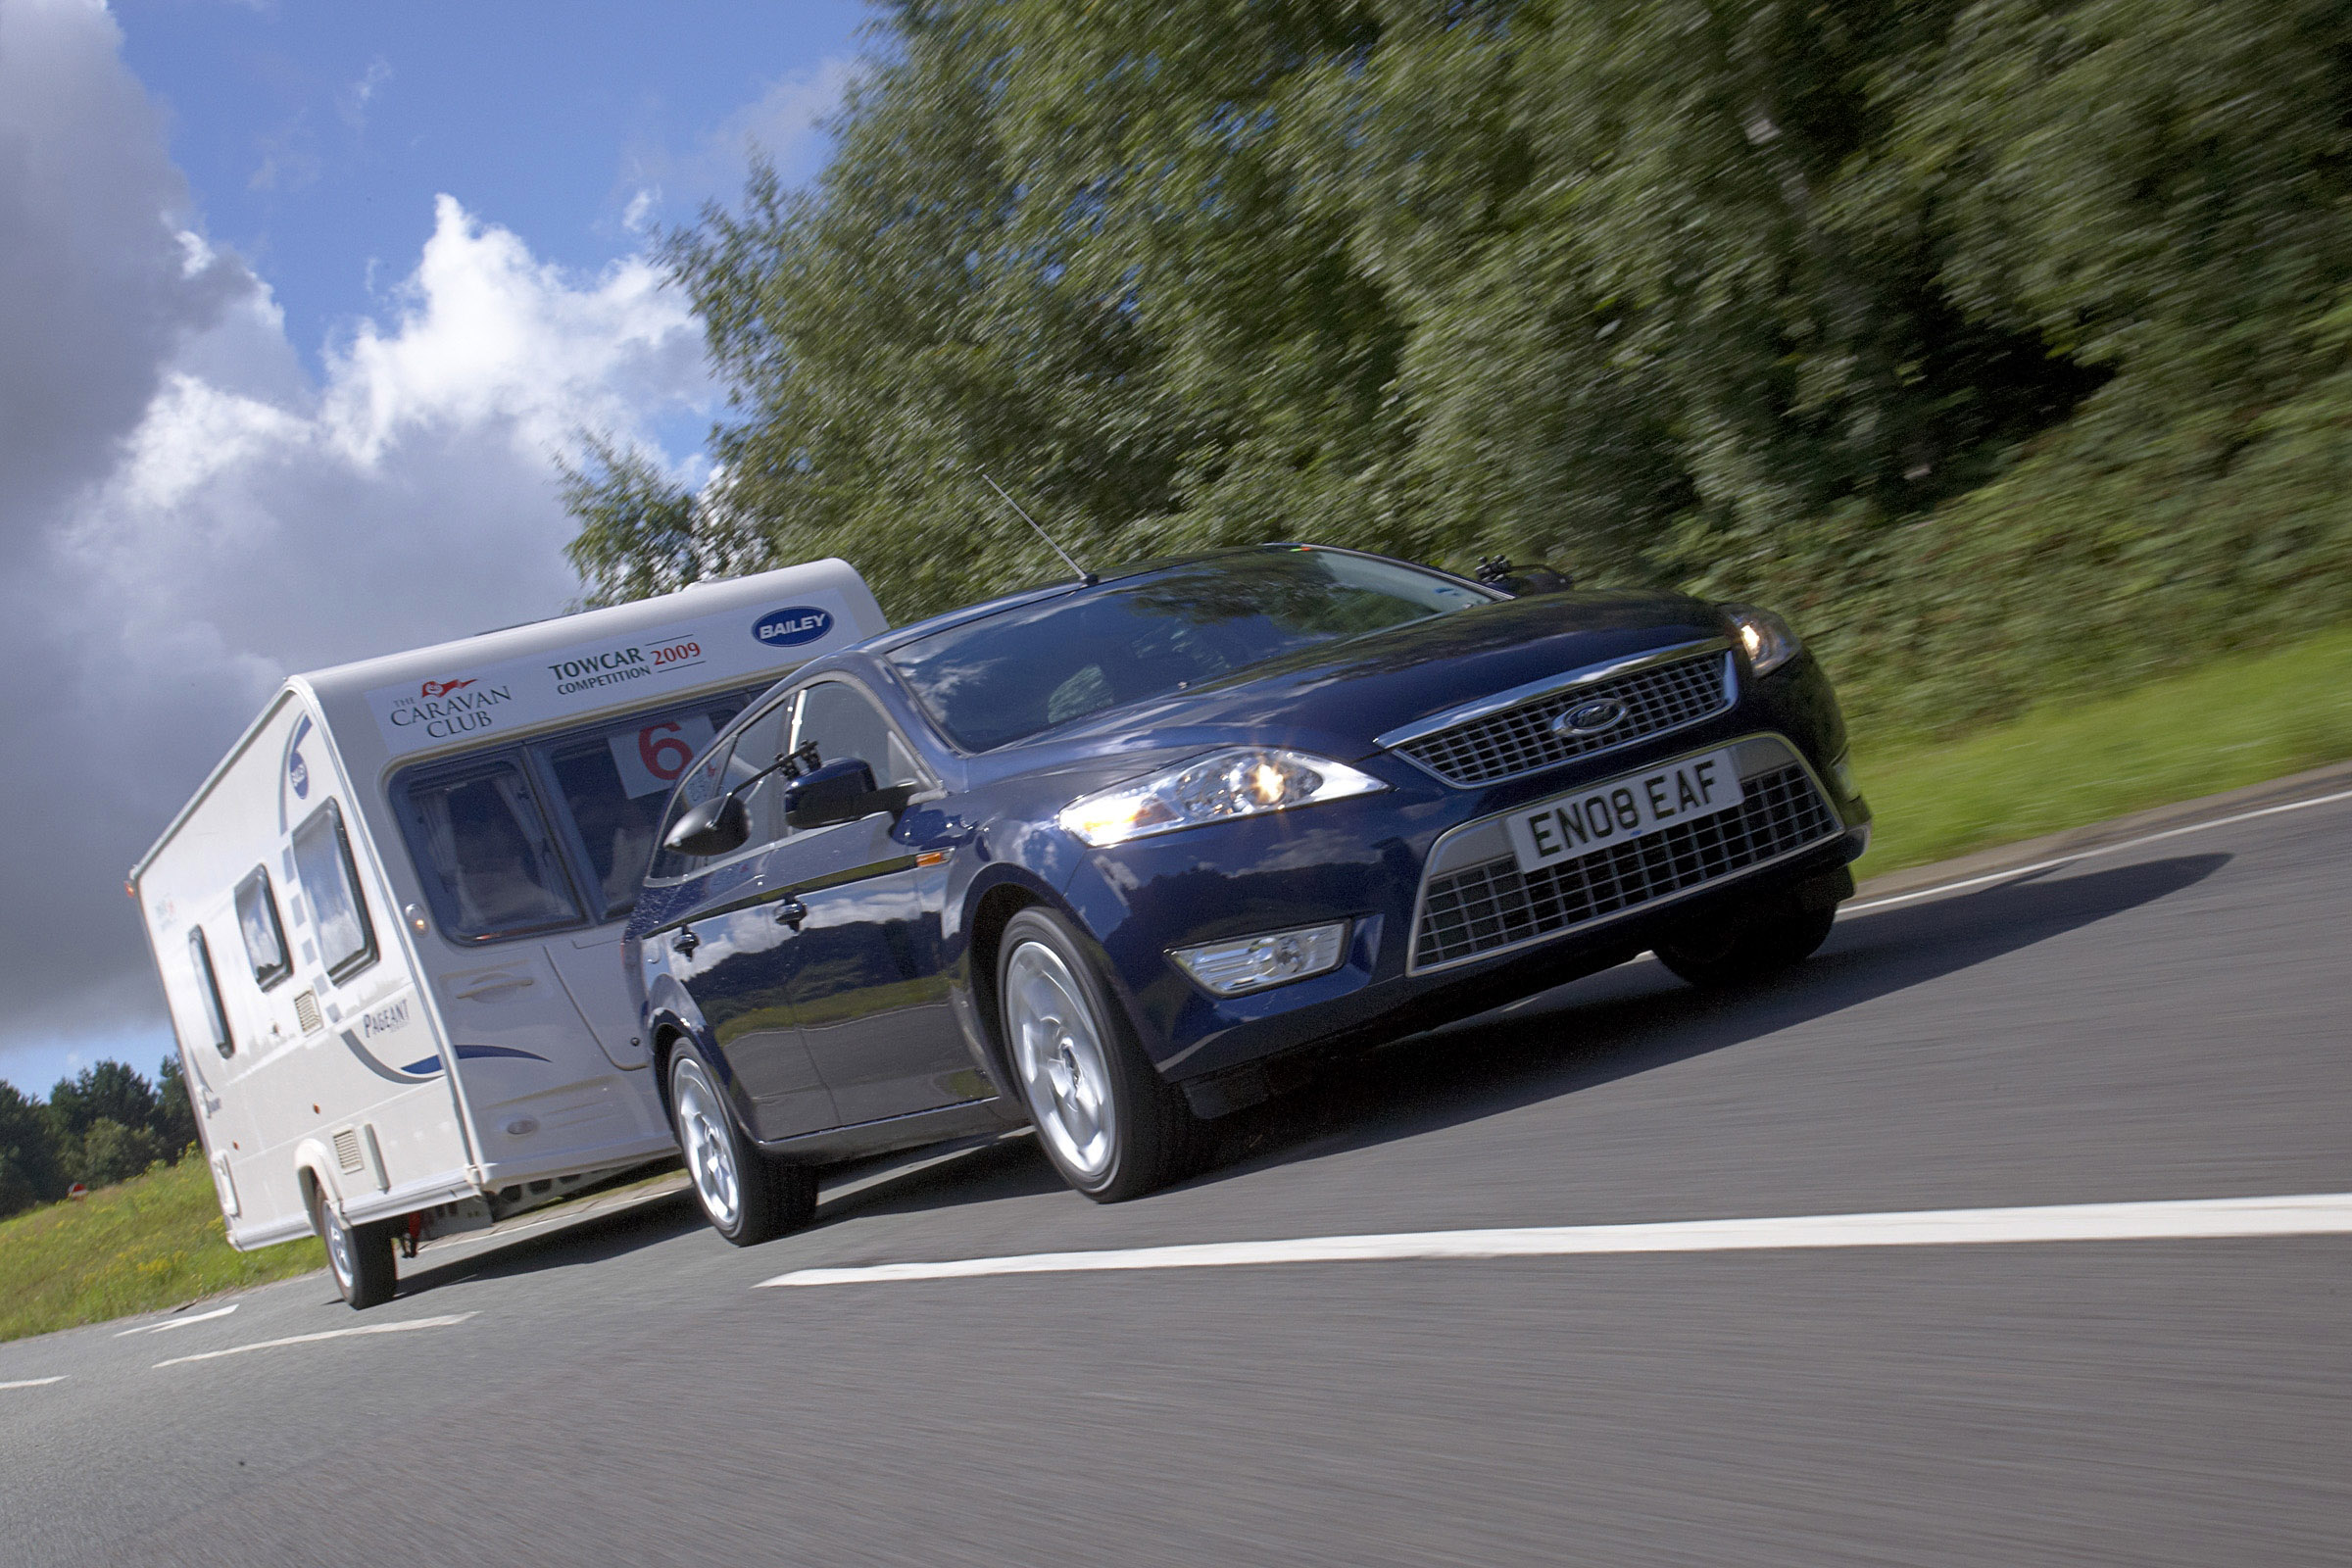 Ford Mondeo Tow Car of the Year